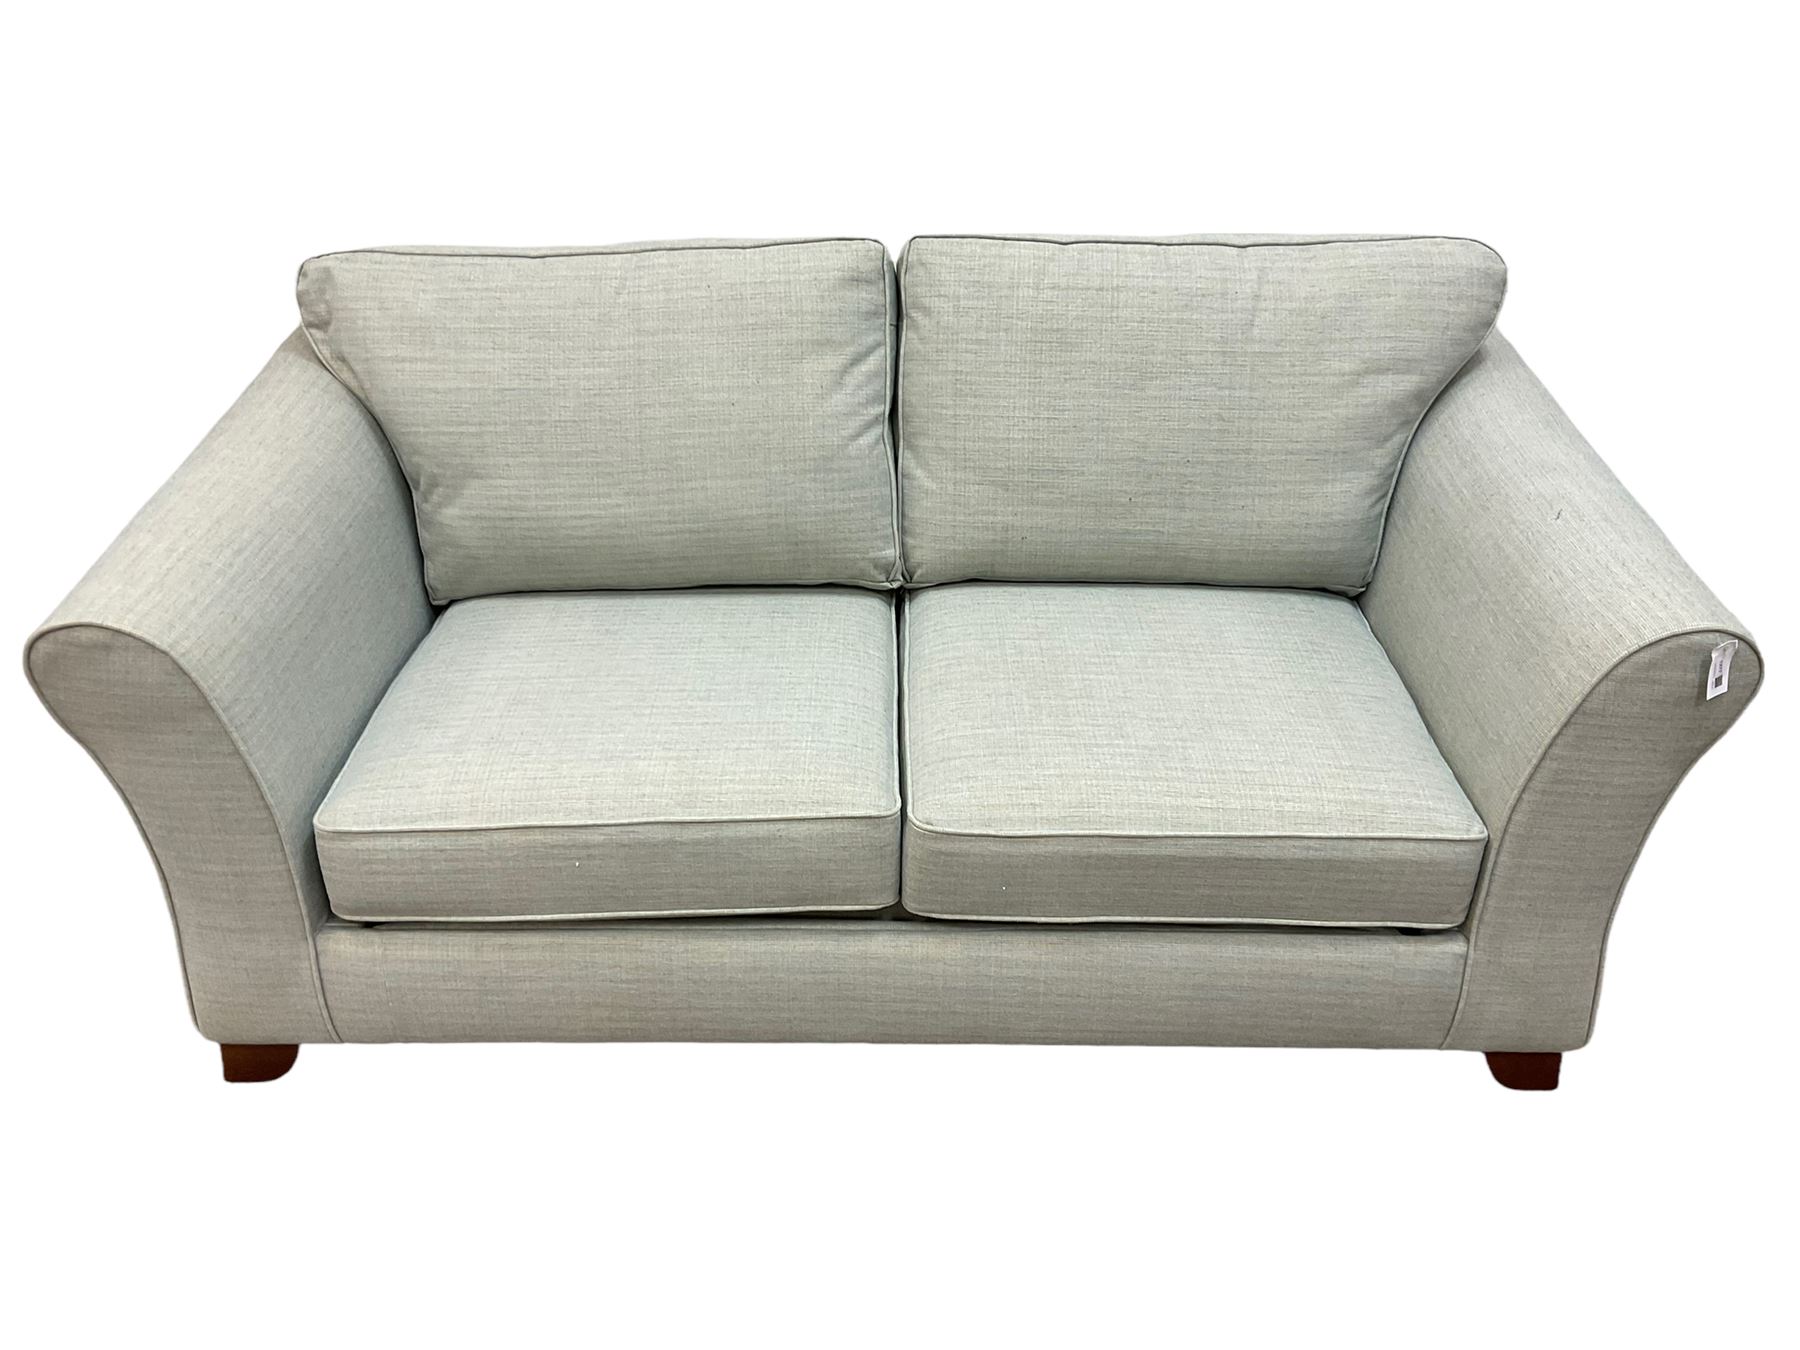 marks and spencer logan sofa bed